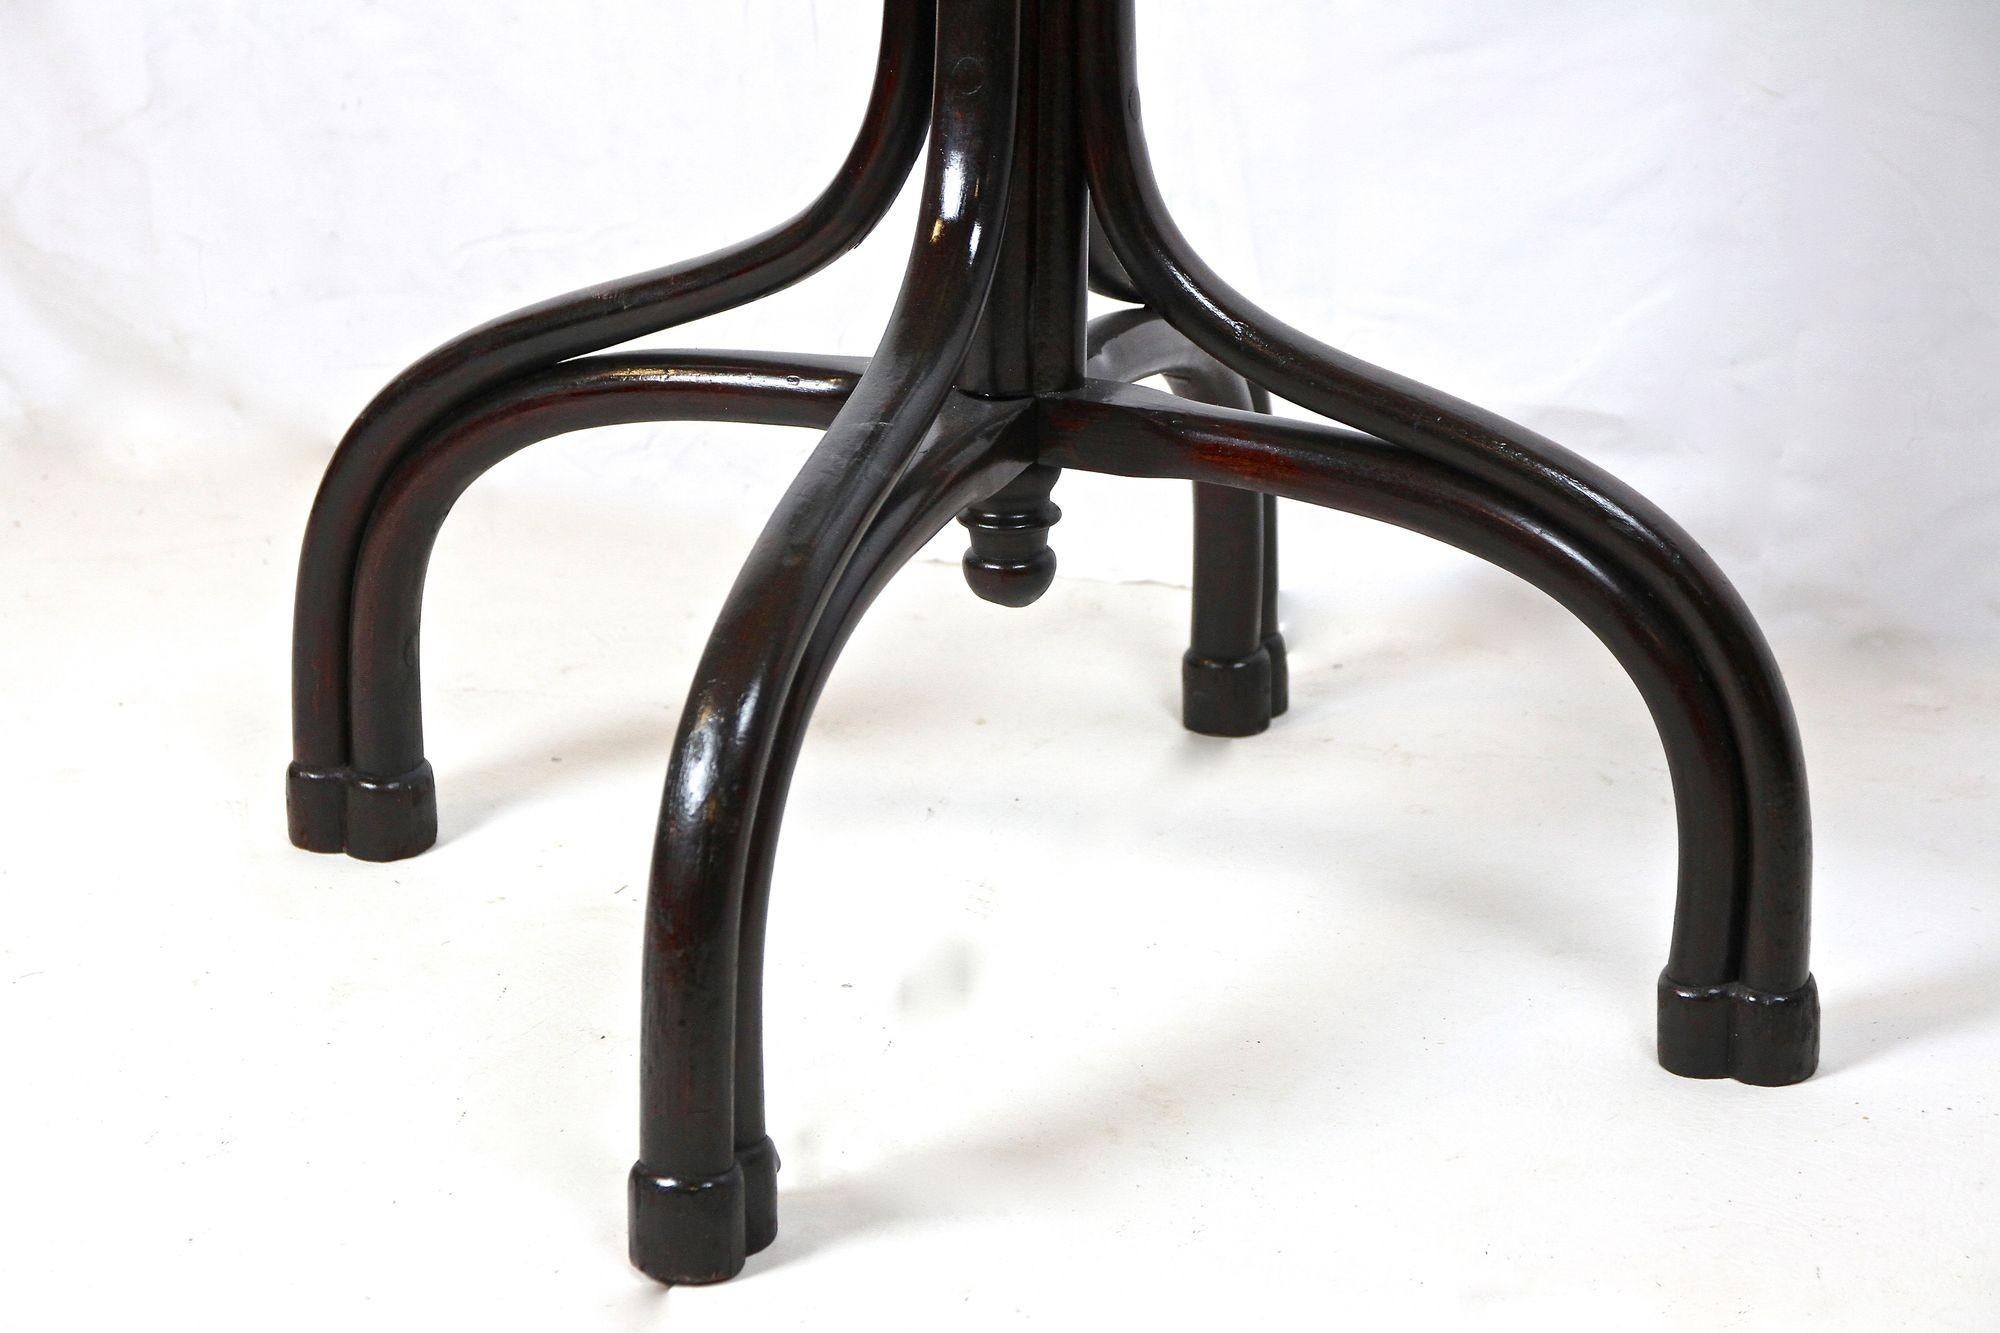 Thonet Coat Rack/ Wardrobe Stand Bentwood Polished, Art Nouveau, AT ca. 1905 For Sale 5